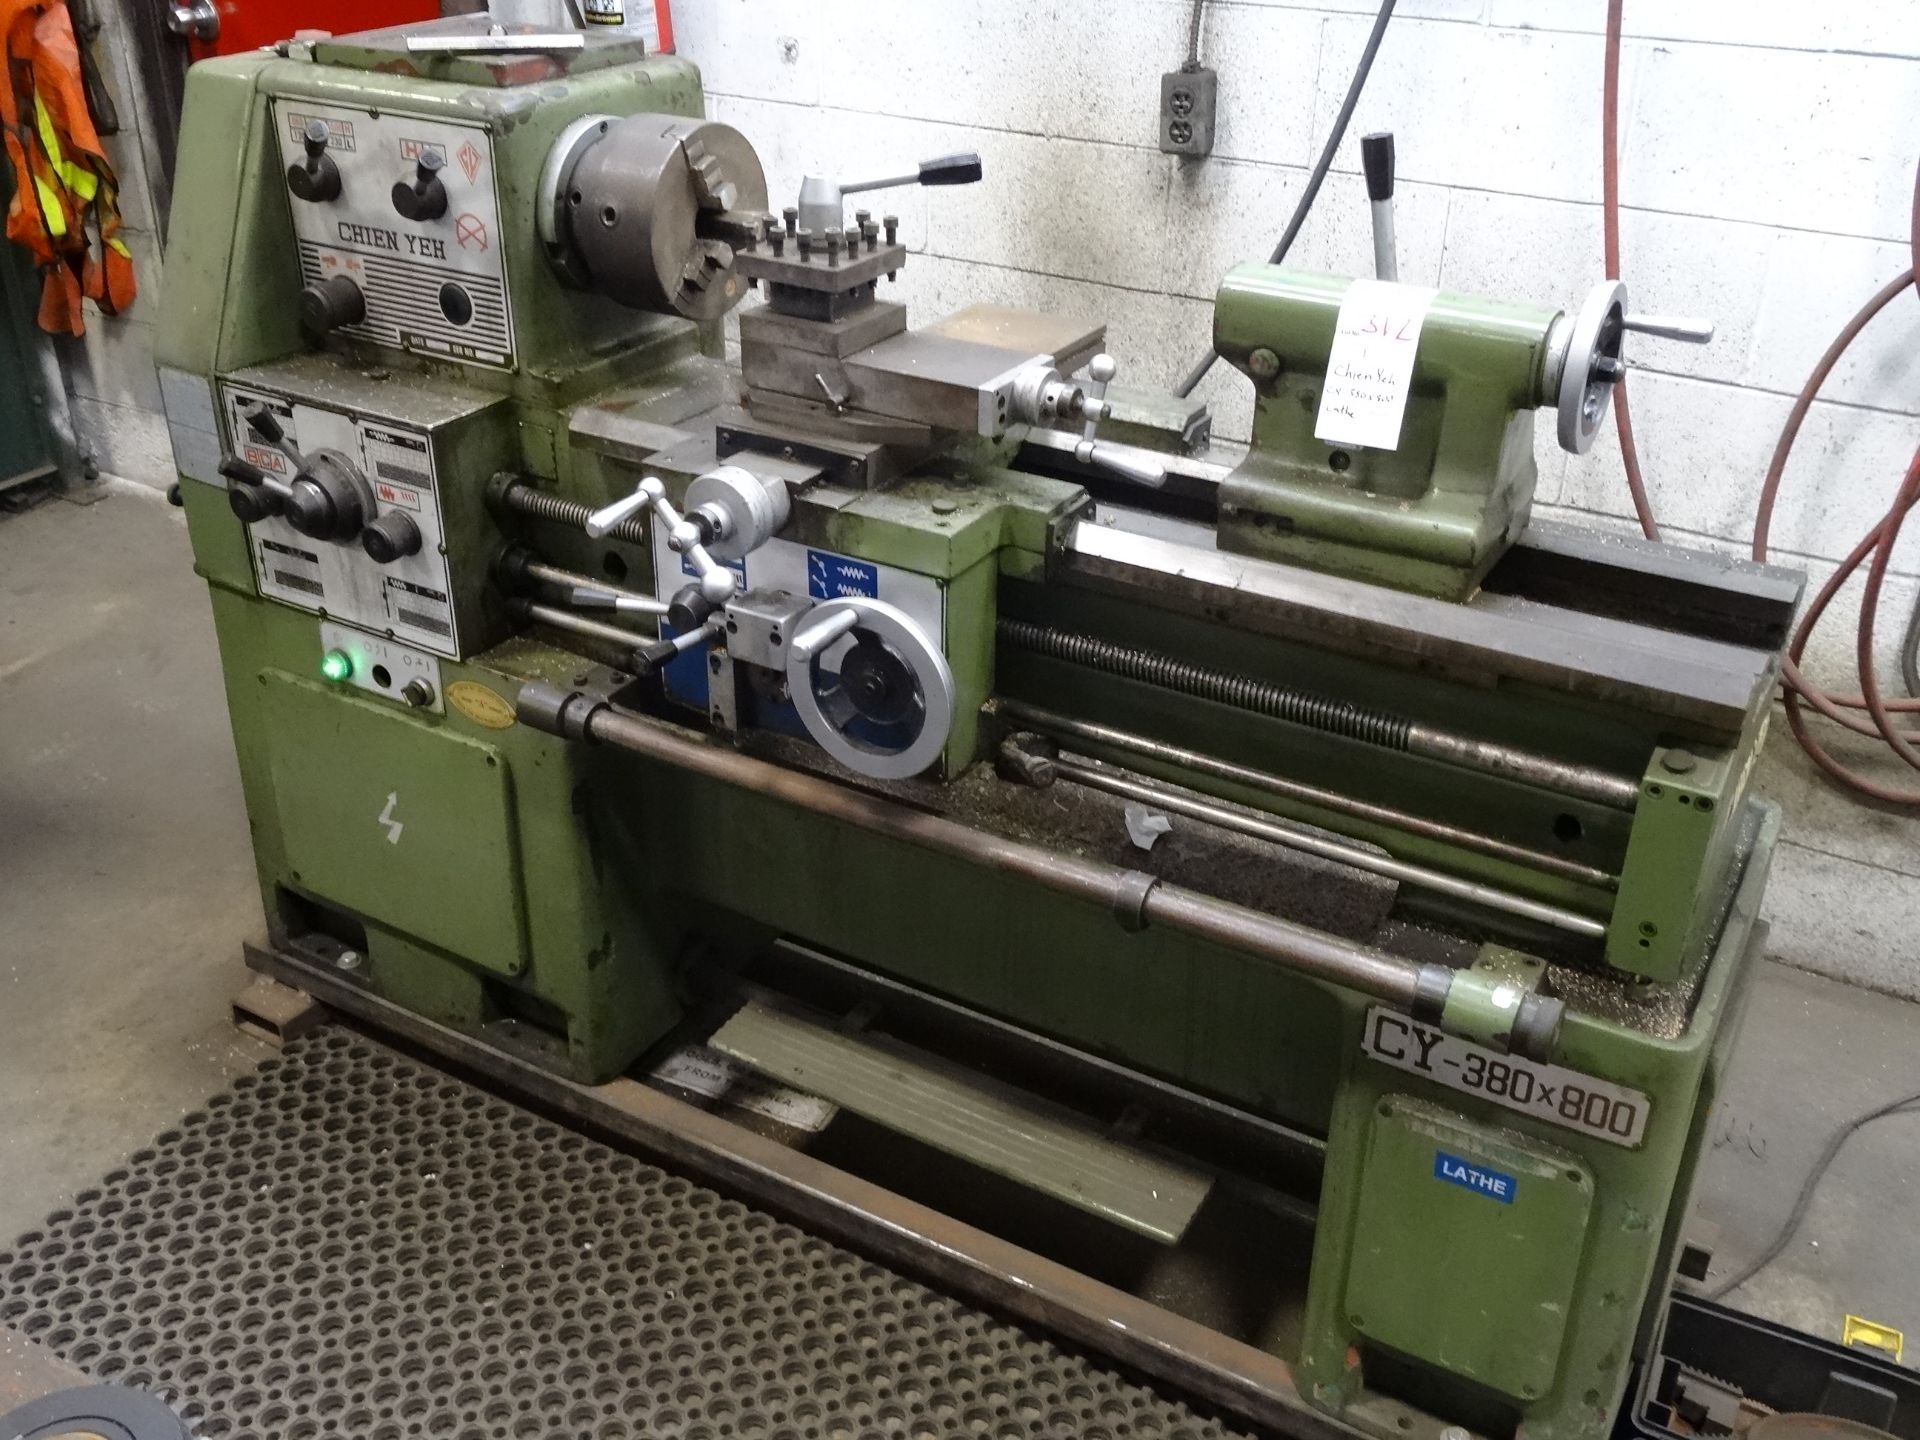 1X, CHIEN YEH, CY-380X800 LATHE (SEE SPECIAL NOTE)